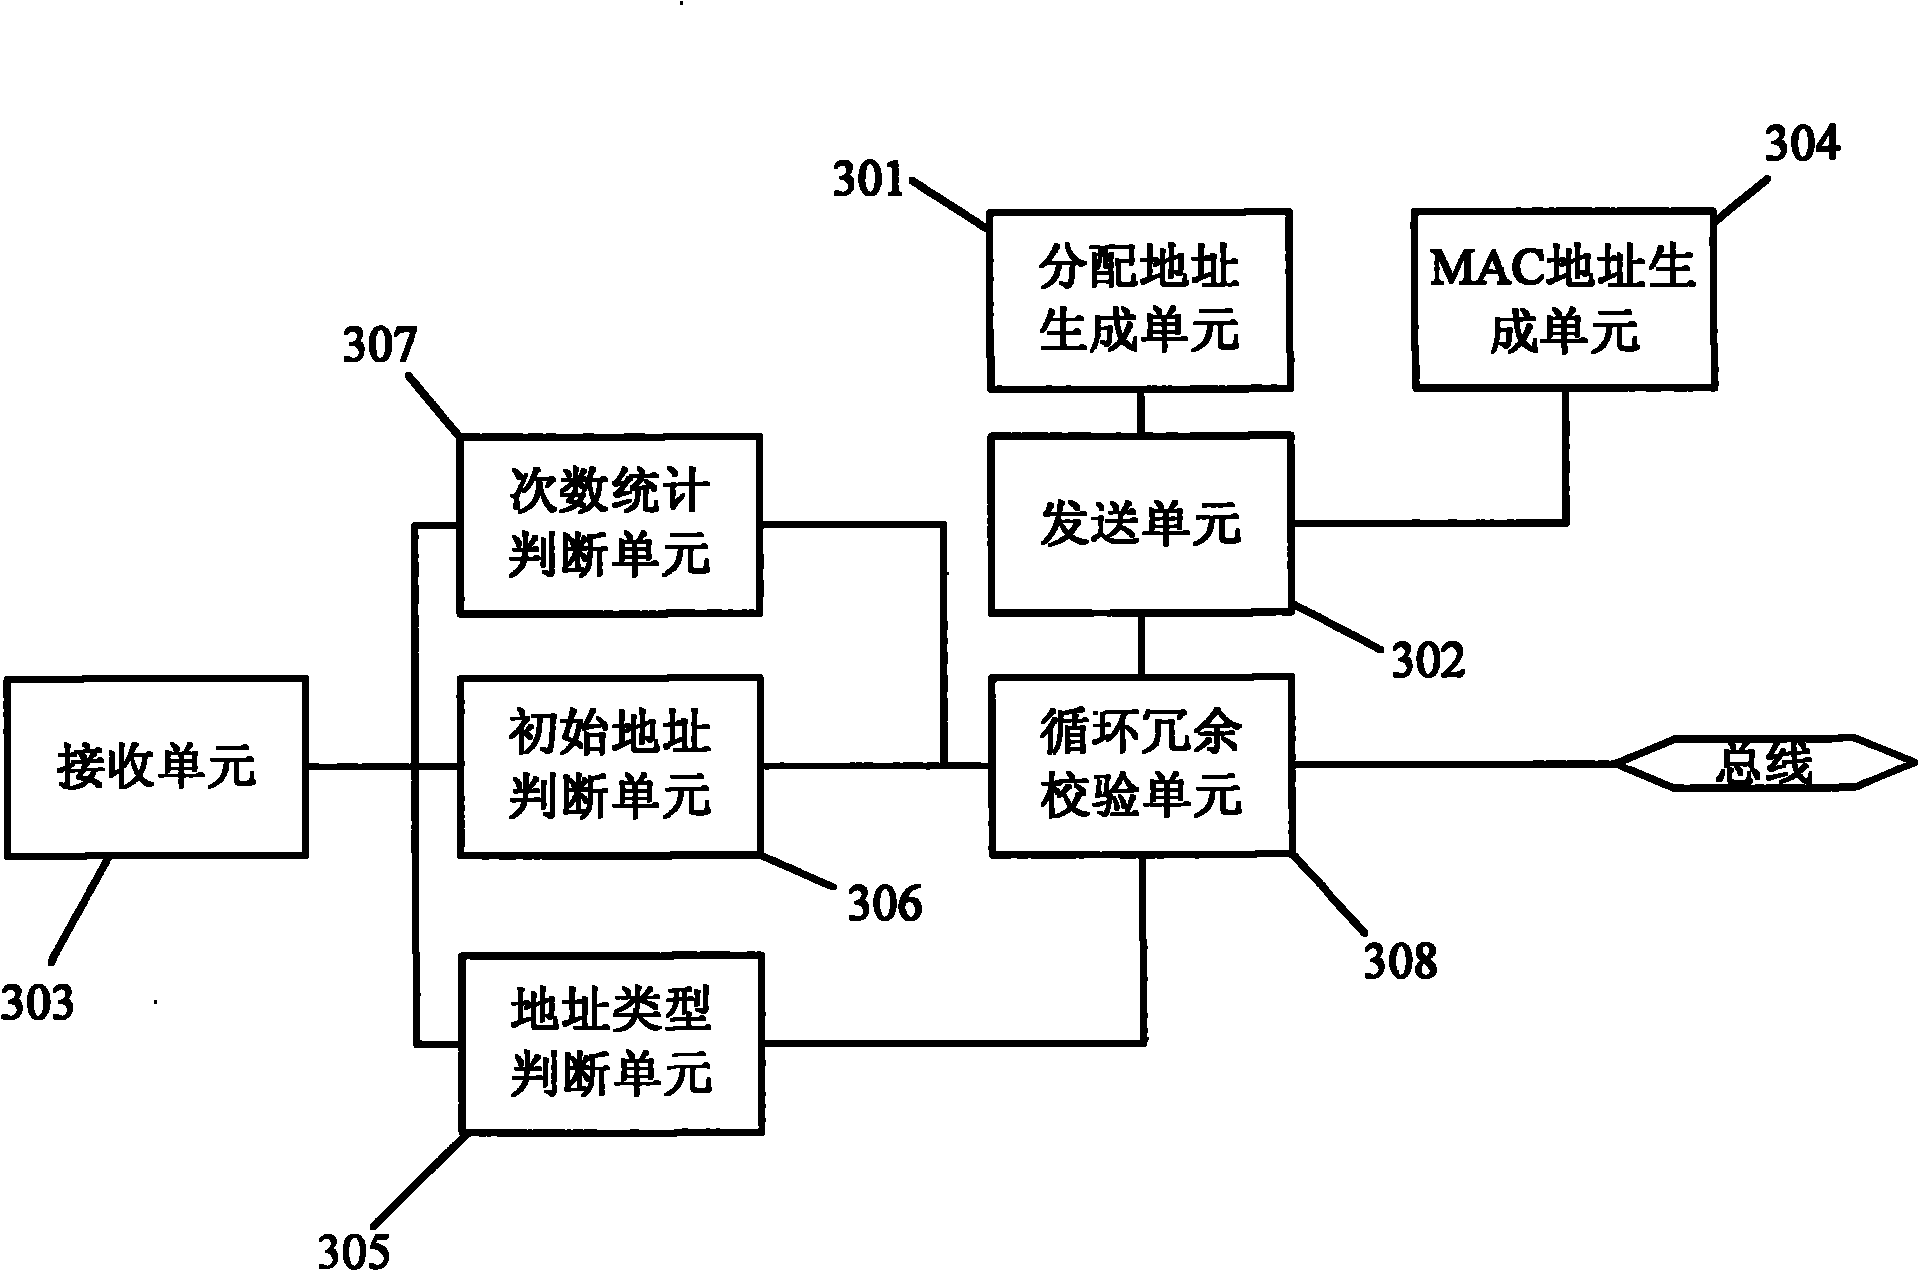 Automatic addressing method for air conditioning system and air conditioning controller